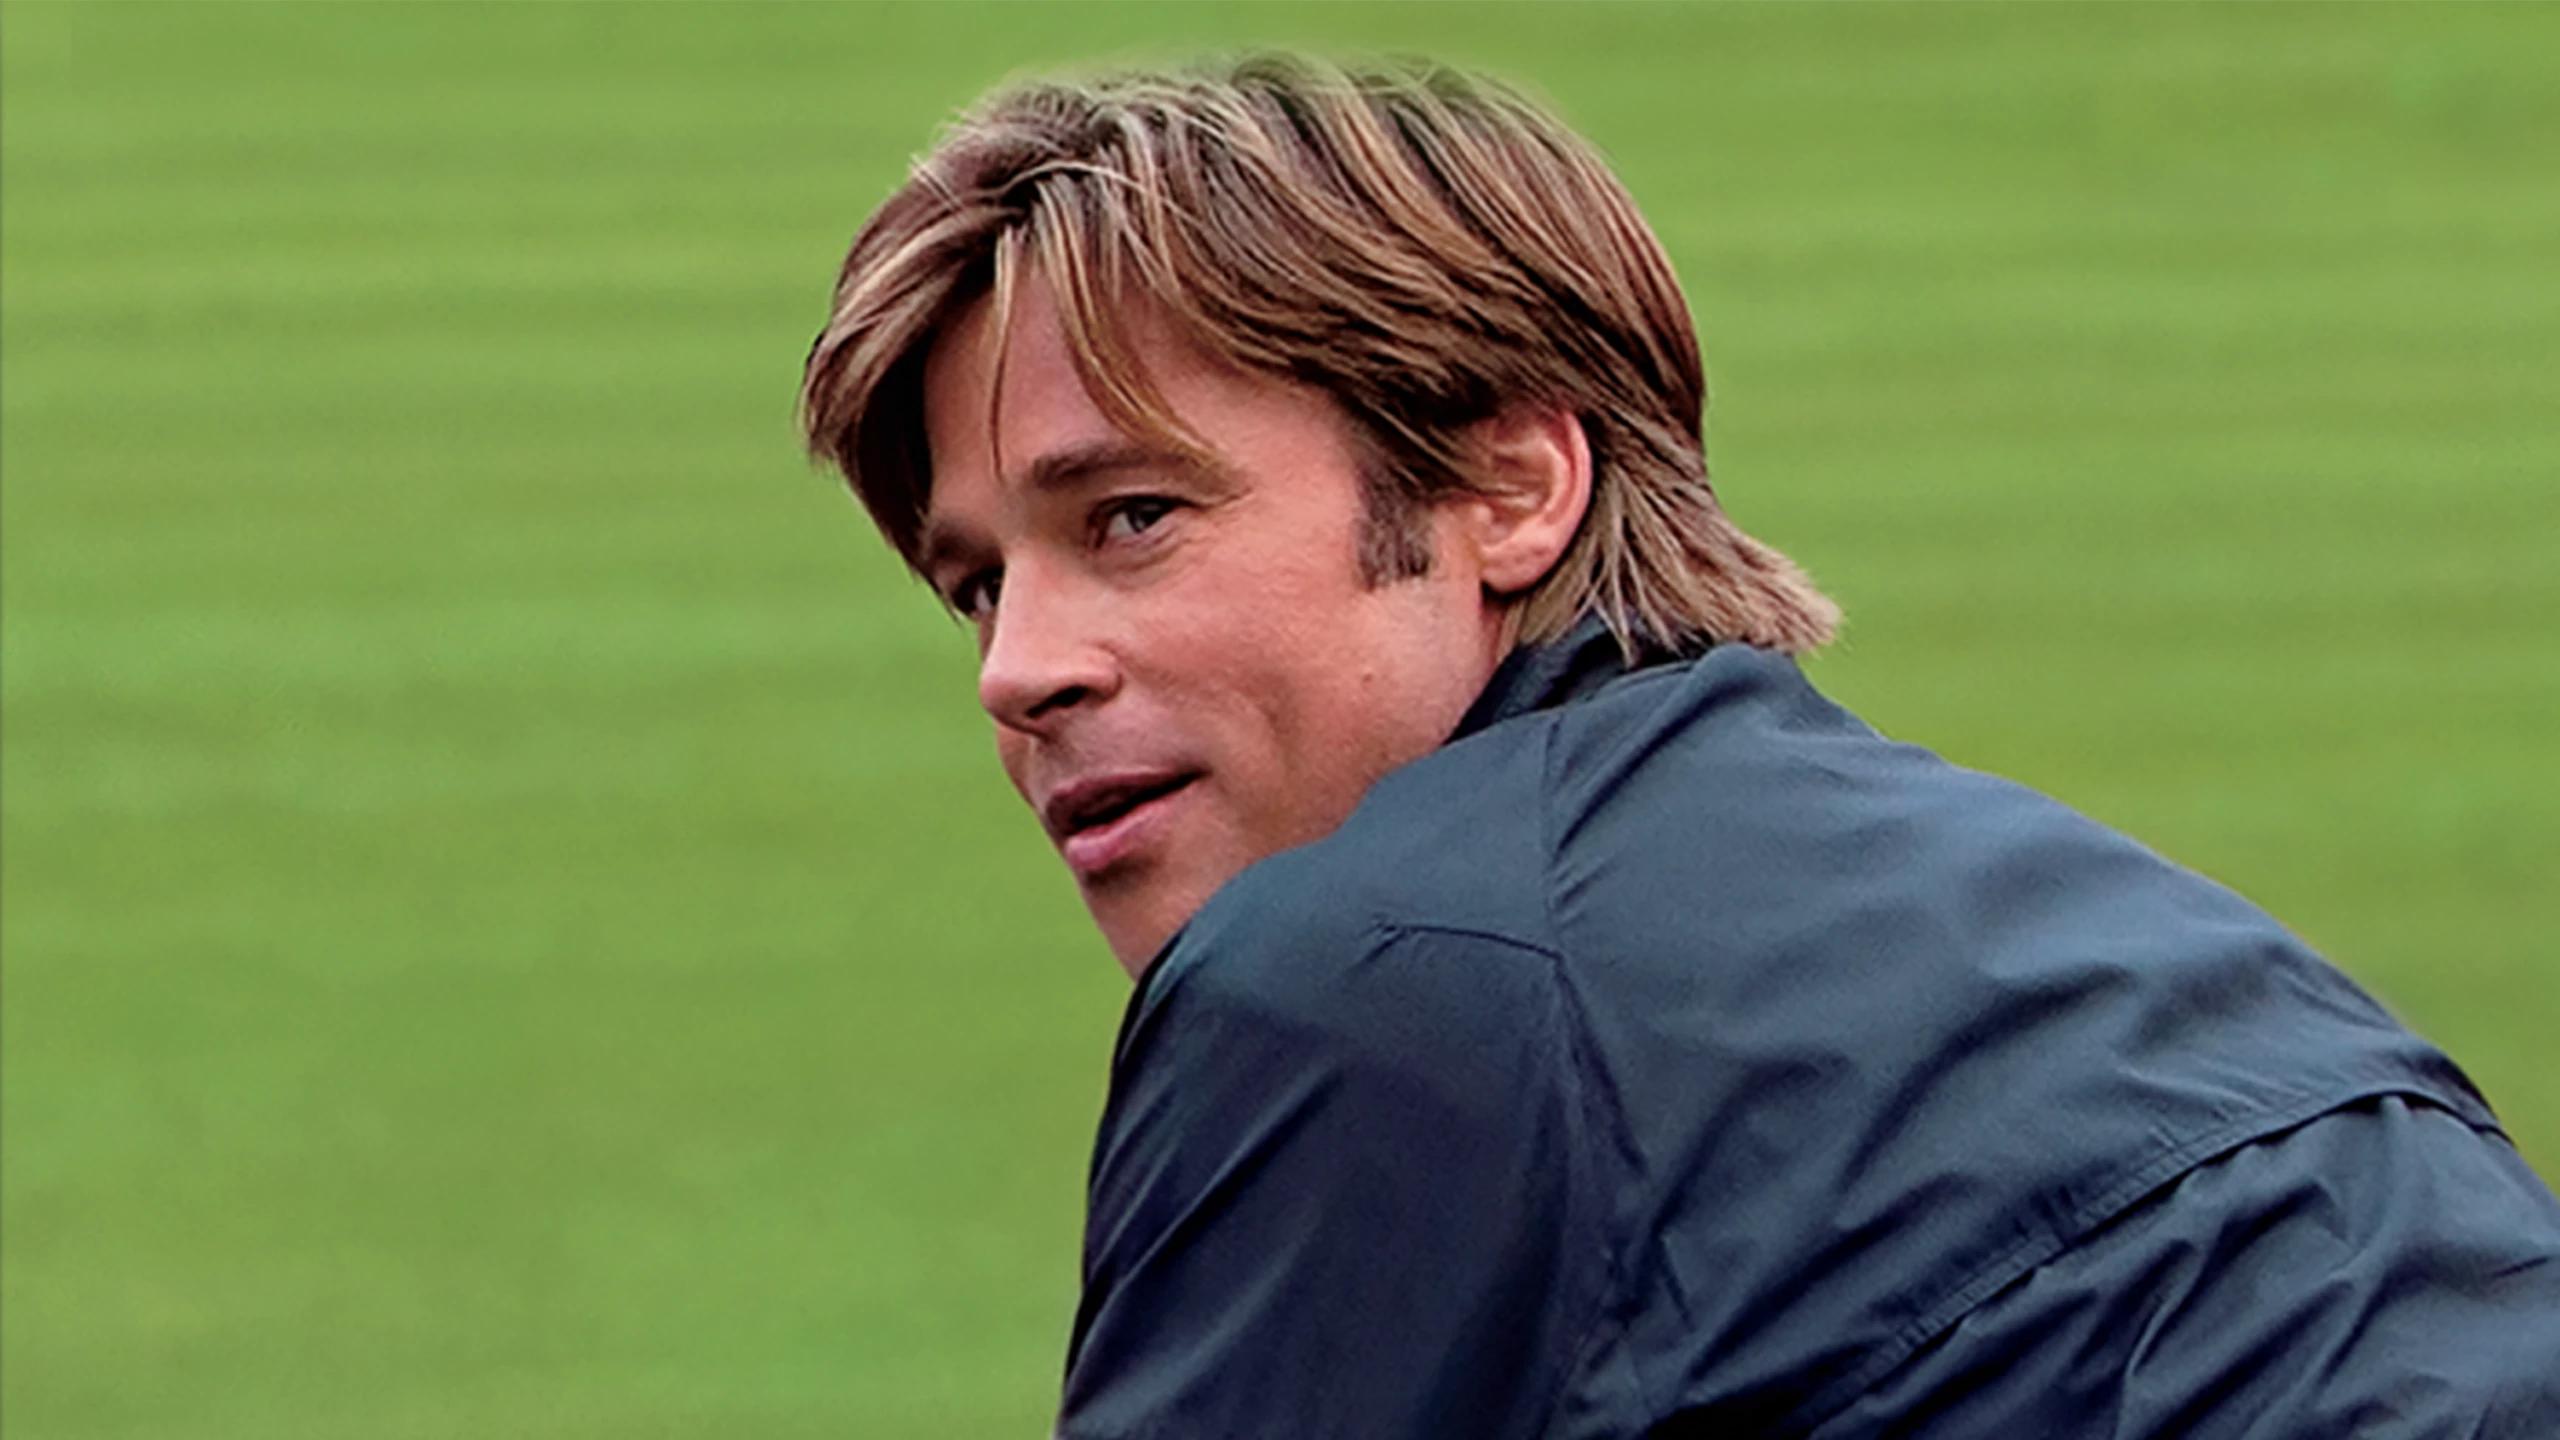 Moneyball is on Showmax